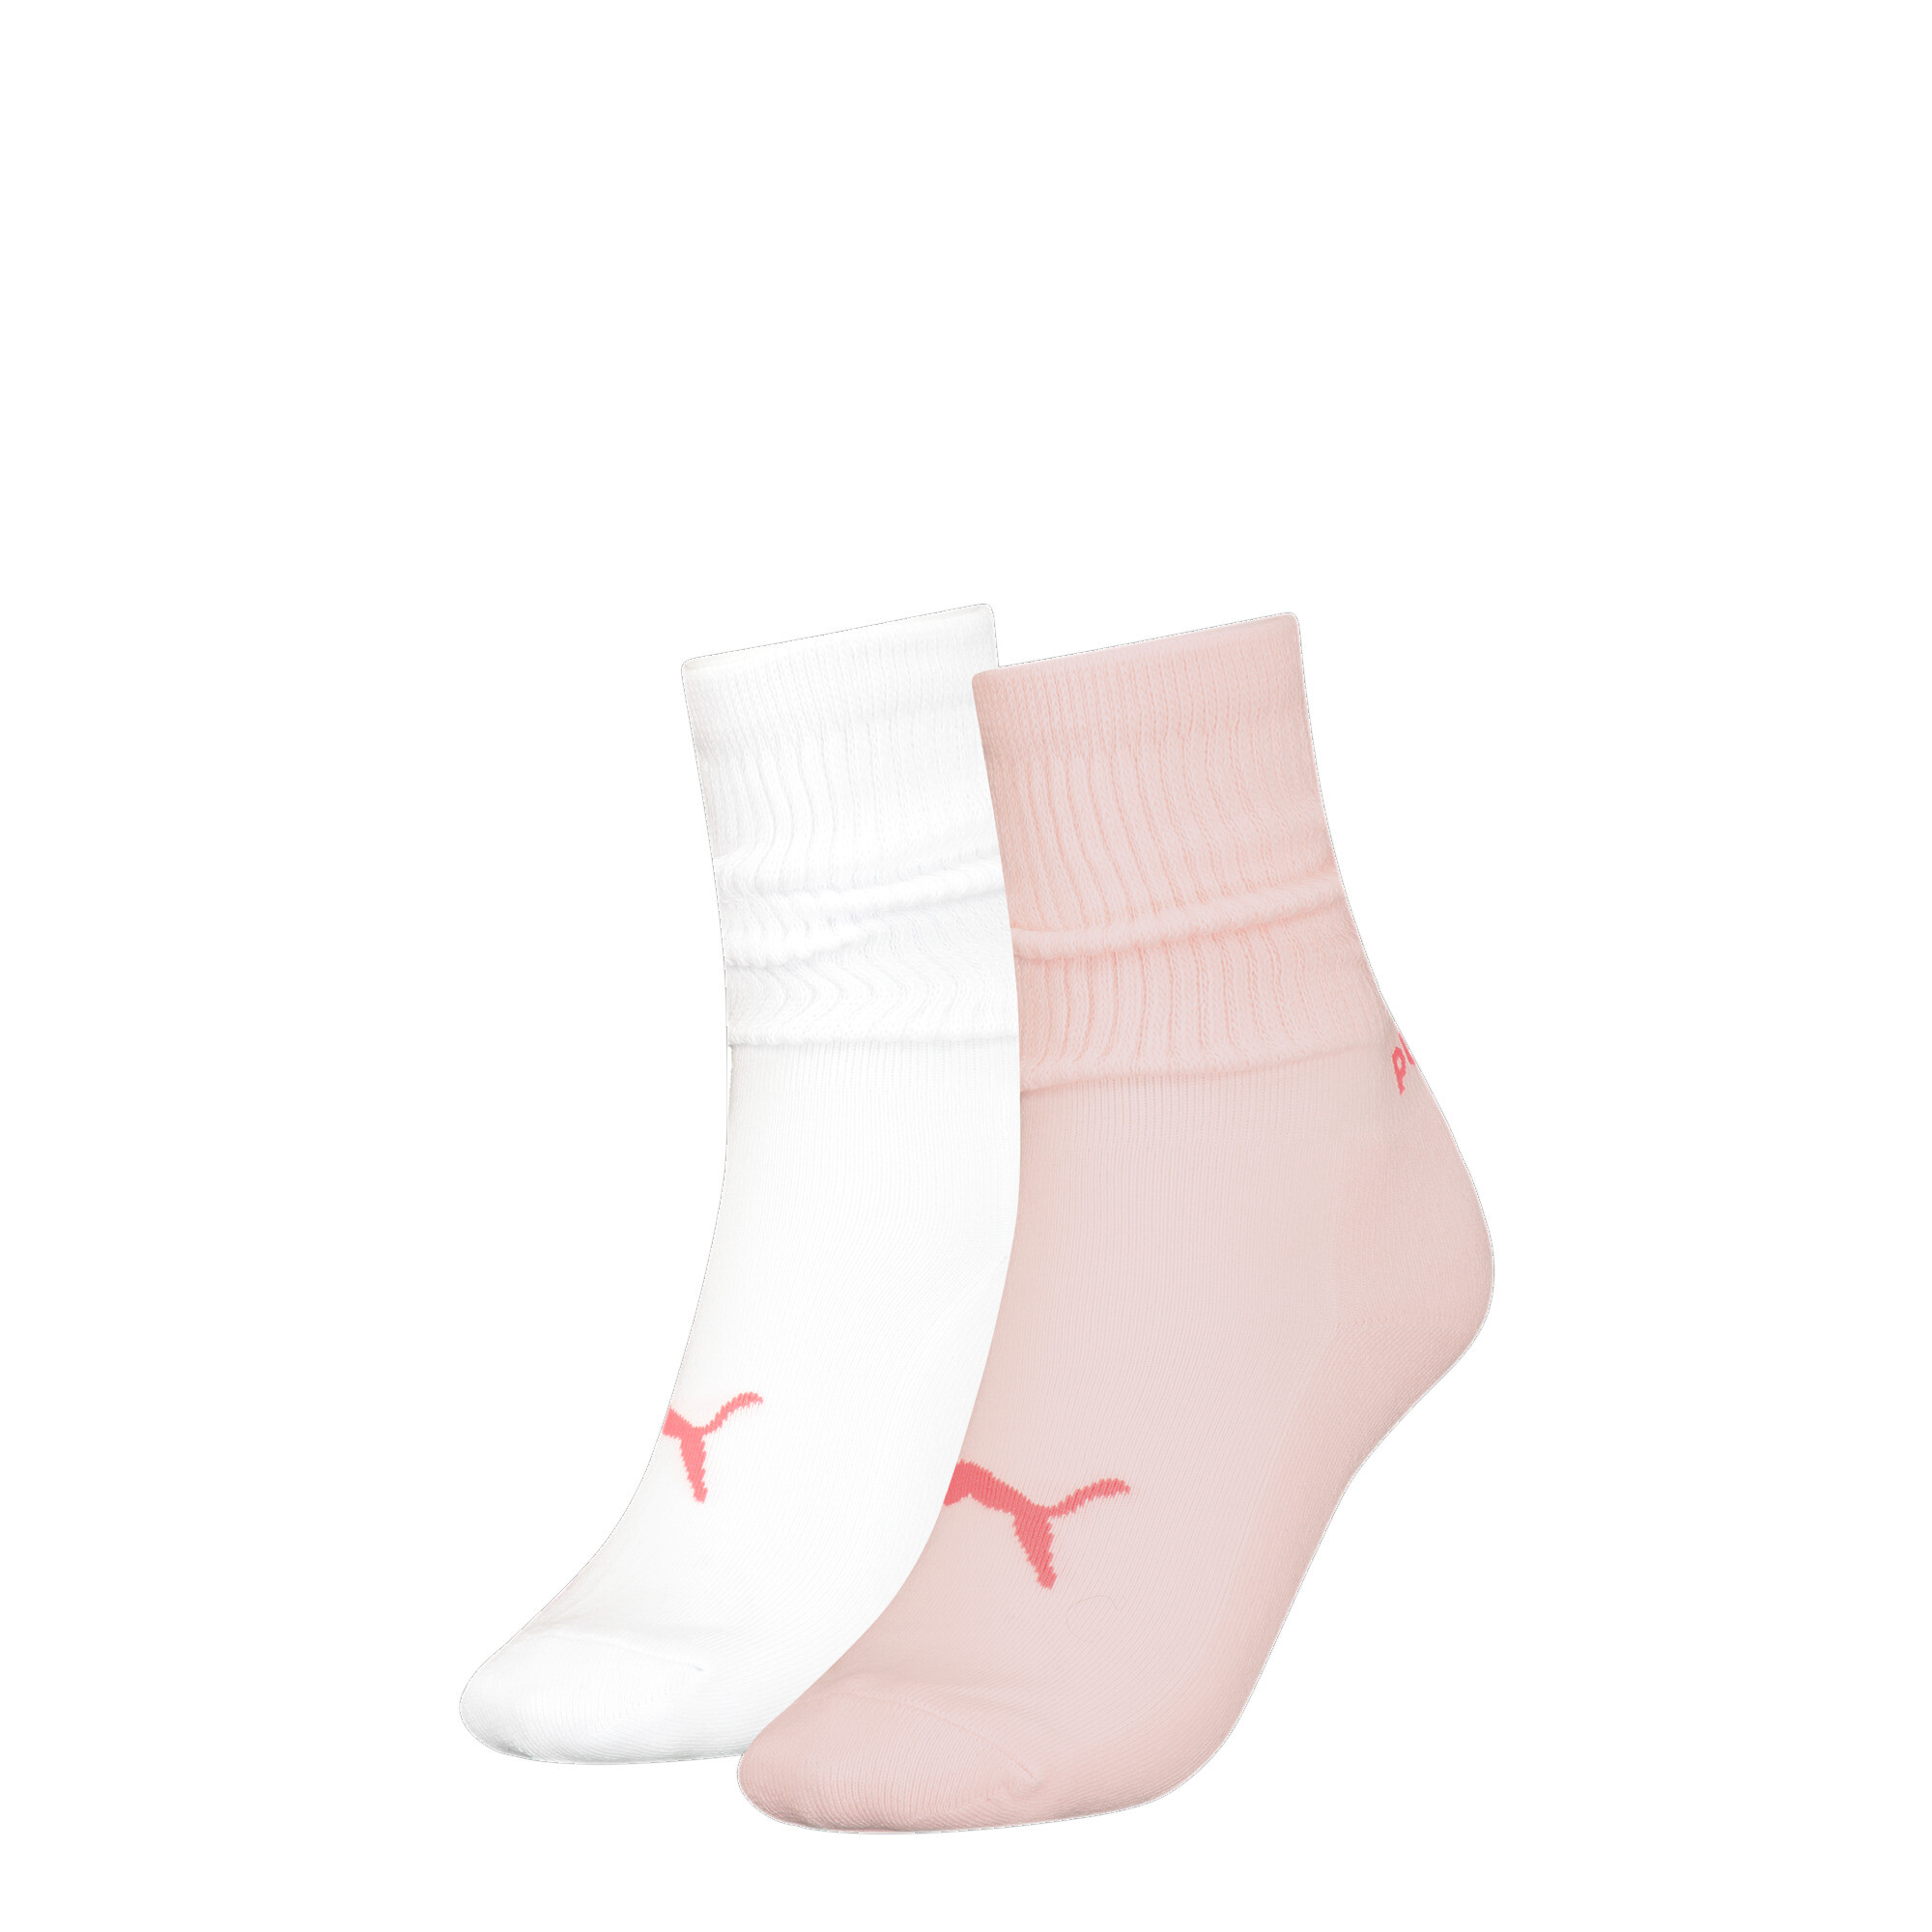 Women's PUMA Slouch Crew Socks 2 Pack In Pink, Size 35-38